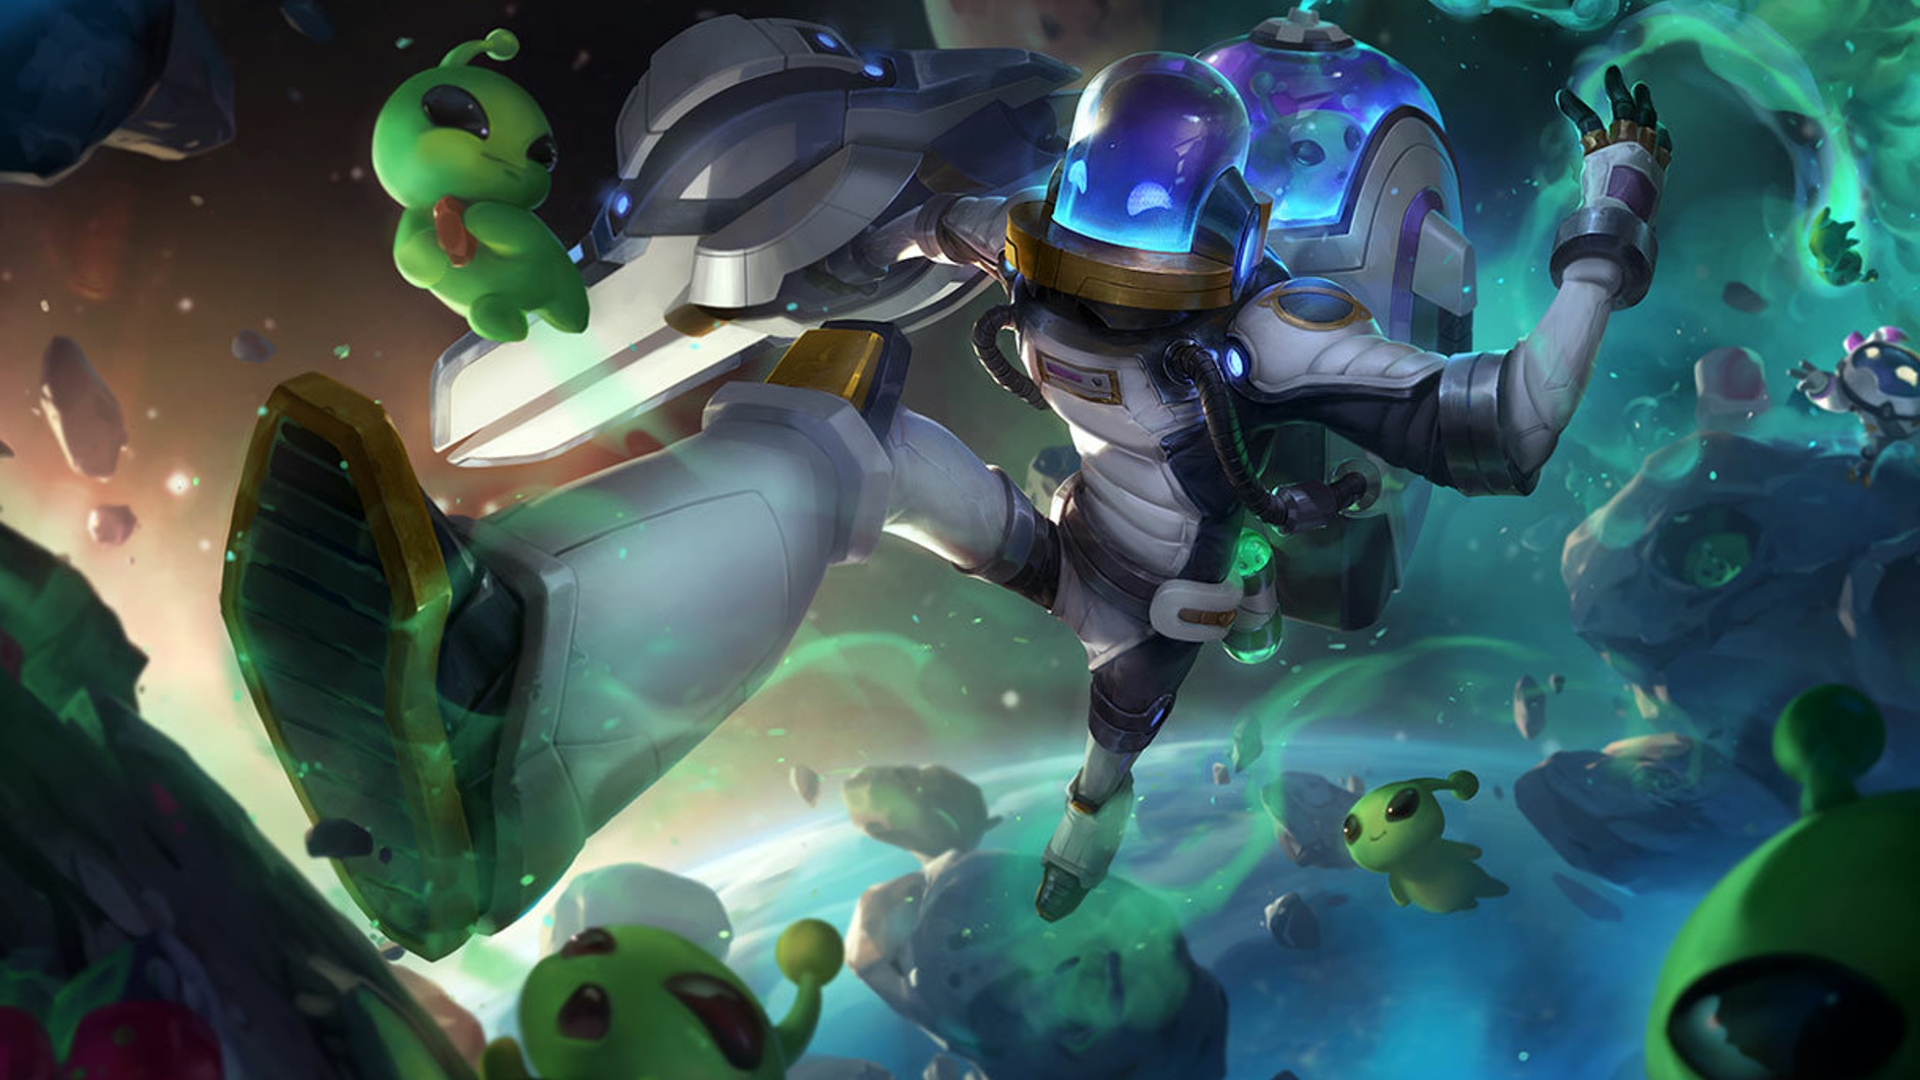 League of Legends dev hints at Singed buffs as players demand changes